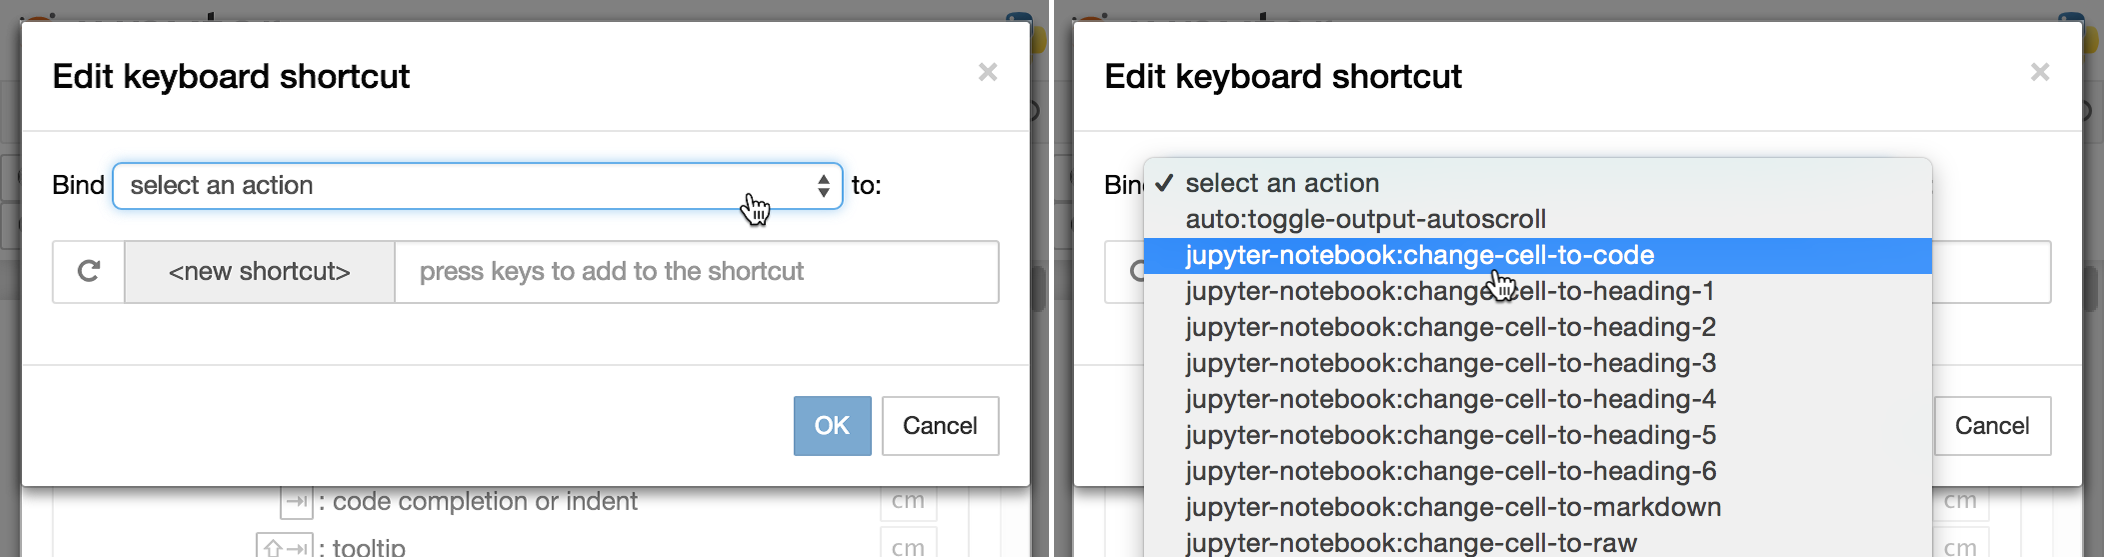 selecting an action for a new keyboard shortcut